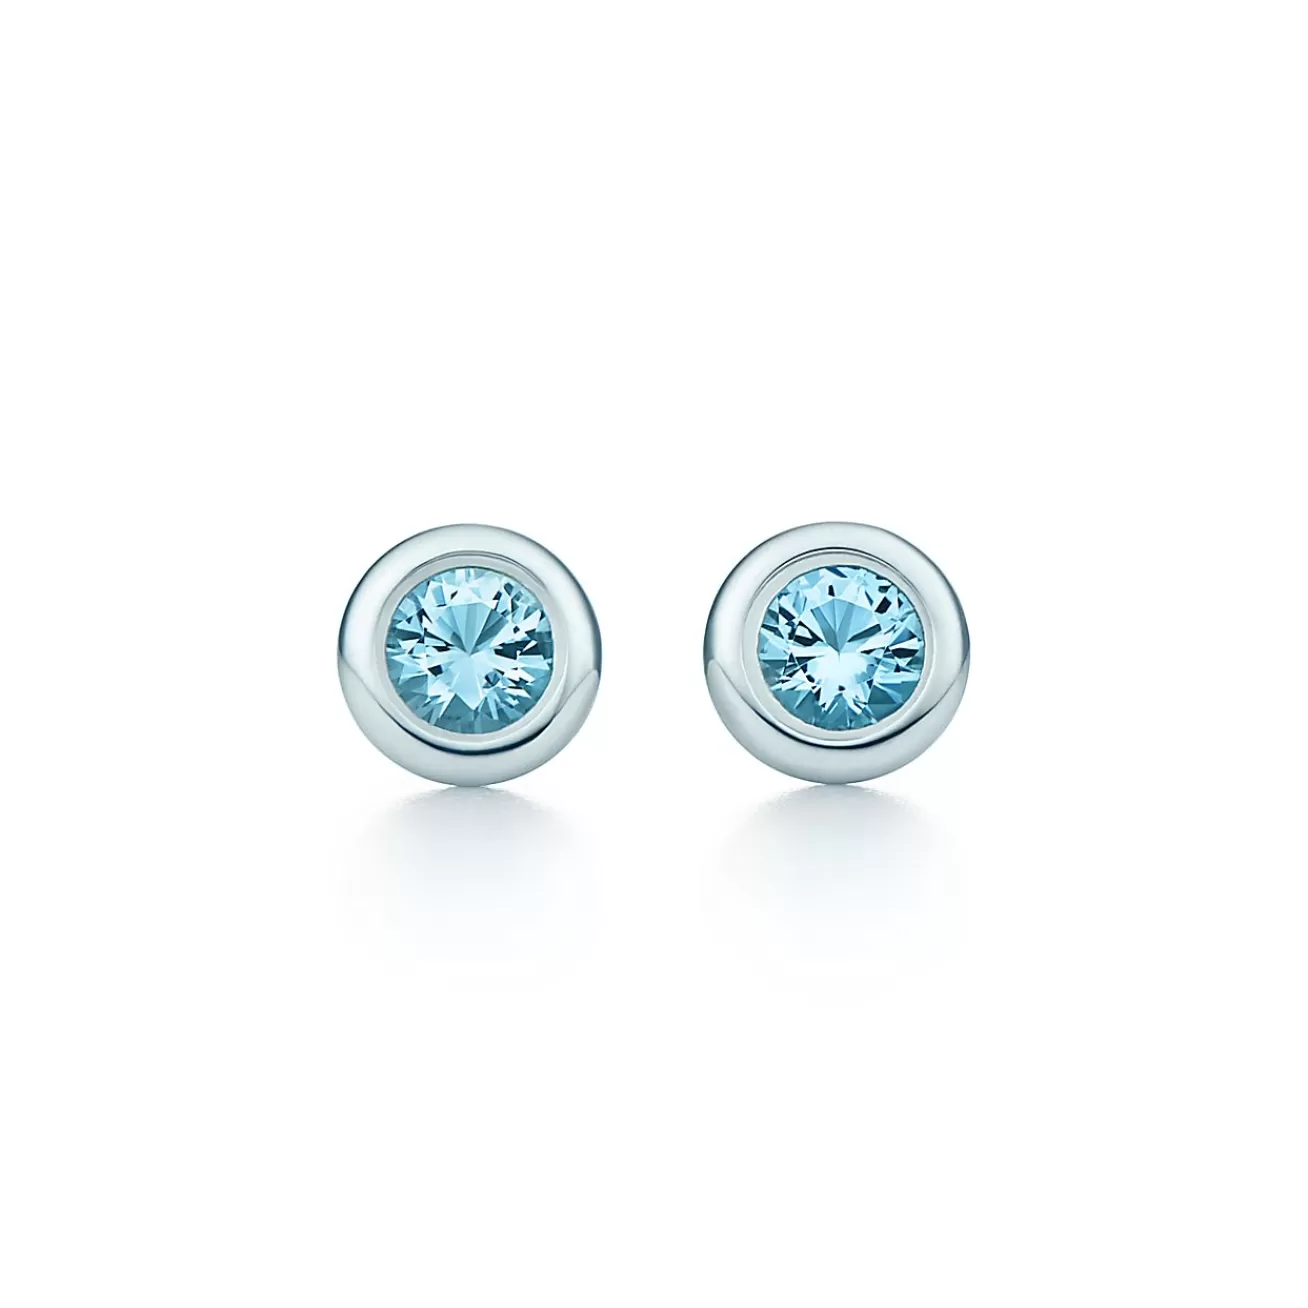 Tiffany & Co. Elsa Peretti® Color by the Yard earrings in sterling silver with aquamarines. | ^ Earrings | Sterling Silver Jewelry